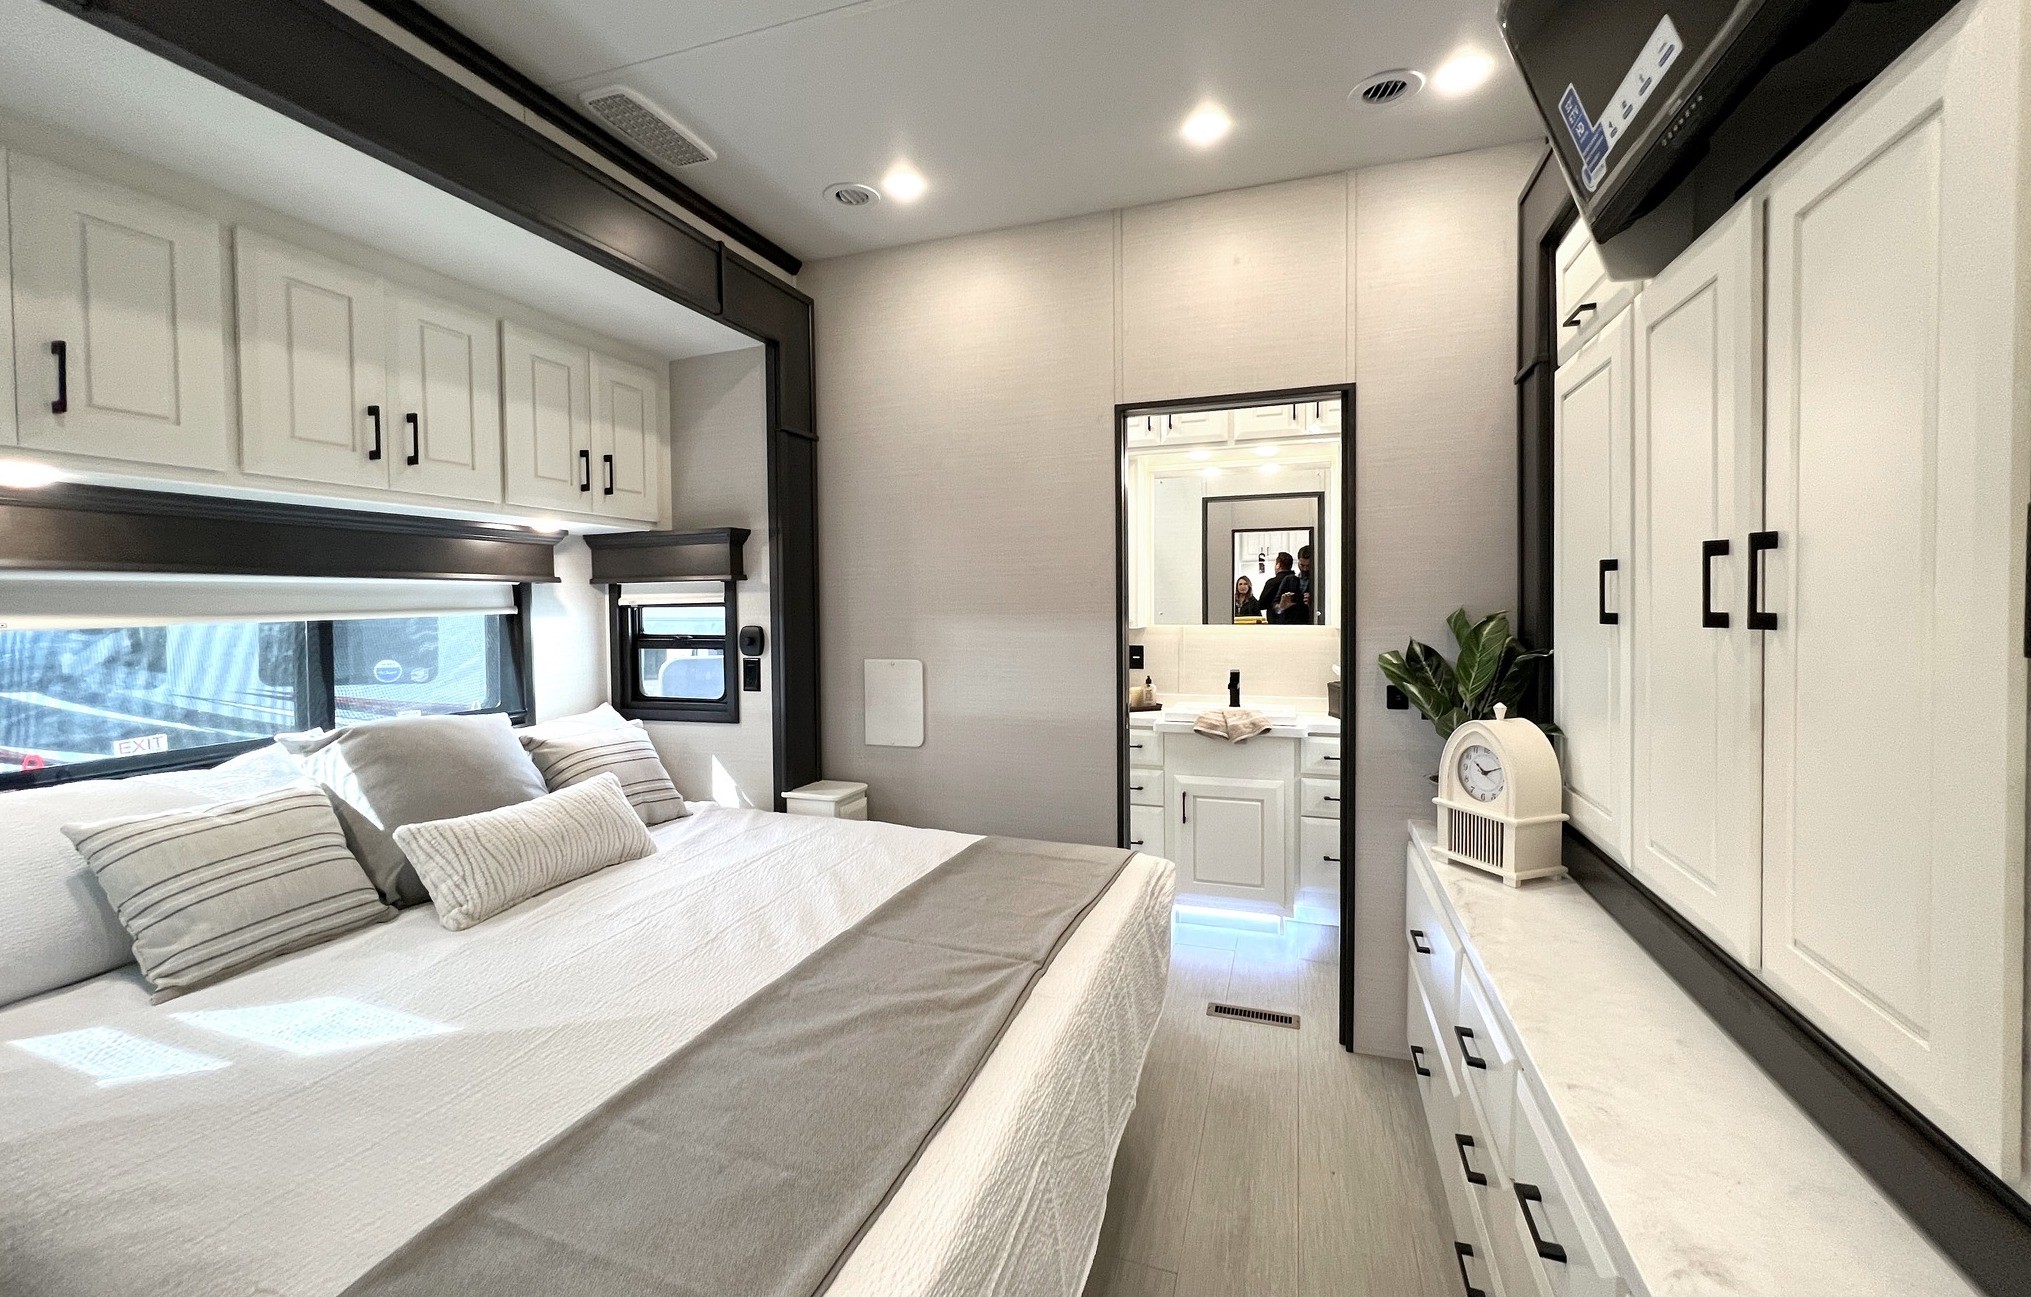 DRV's 2023 Orlando Is a "Mobile Suite" Built for the Finest Living